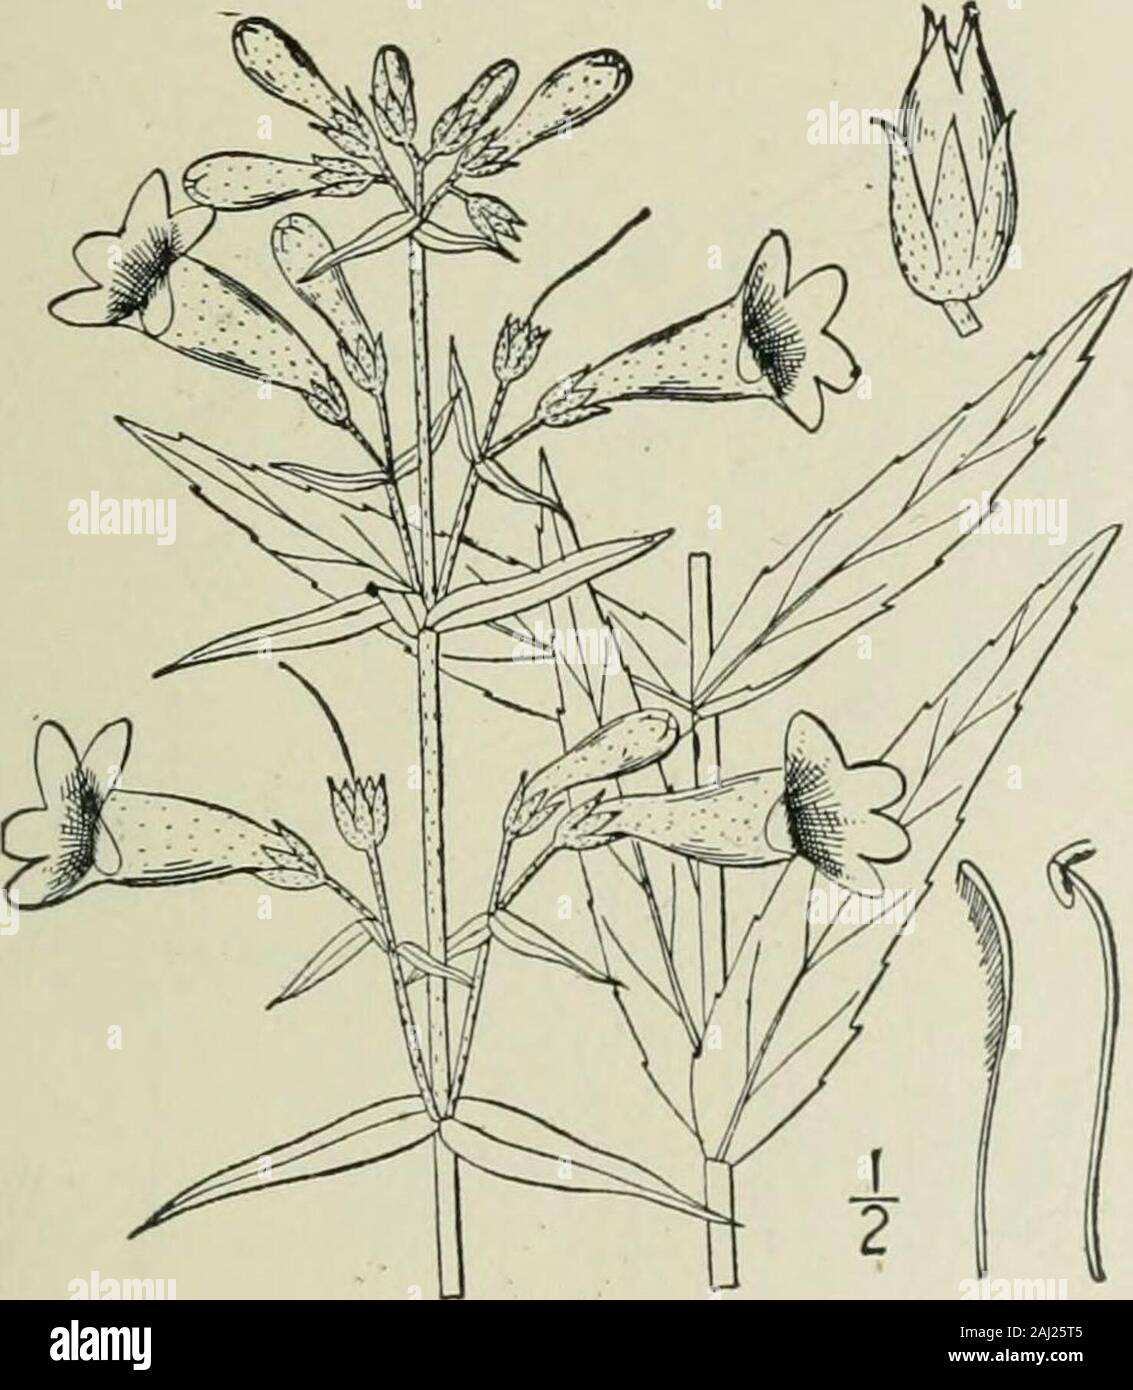 An illustrated flora of the northern United States, Canada and the British possessions : from Newfoundland to the parallel of the southern boundary of Virginia and from the Atlantic Ocean westward to the 102nd meridian . 9. Pentstemon gracilis Nutt. SlenderBeard-tongue. Fig. 3763. Pentstemon gracilis Nutt. Gen. 2: 52. 1818. Glabrous or very nearly so up to the glandular-pubescent inflorescence; stem slender, strict, 6-i8high. Basal and lower leaves linear-oblong orspatulate, mostly obtuse, denticulate, or entire,Is long, narrowed into margined petioles; upperleaves sessile, linear-lanceolate o Stock Photo